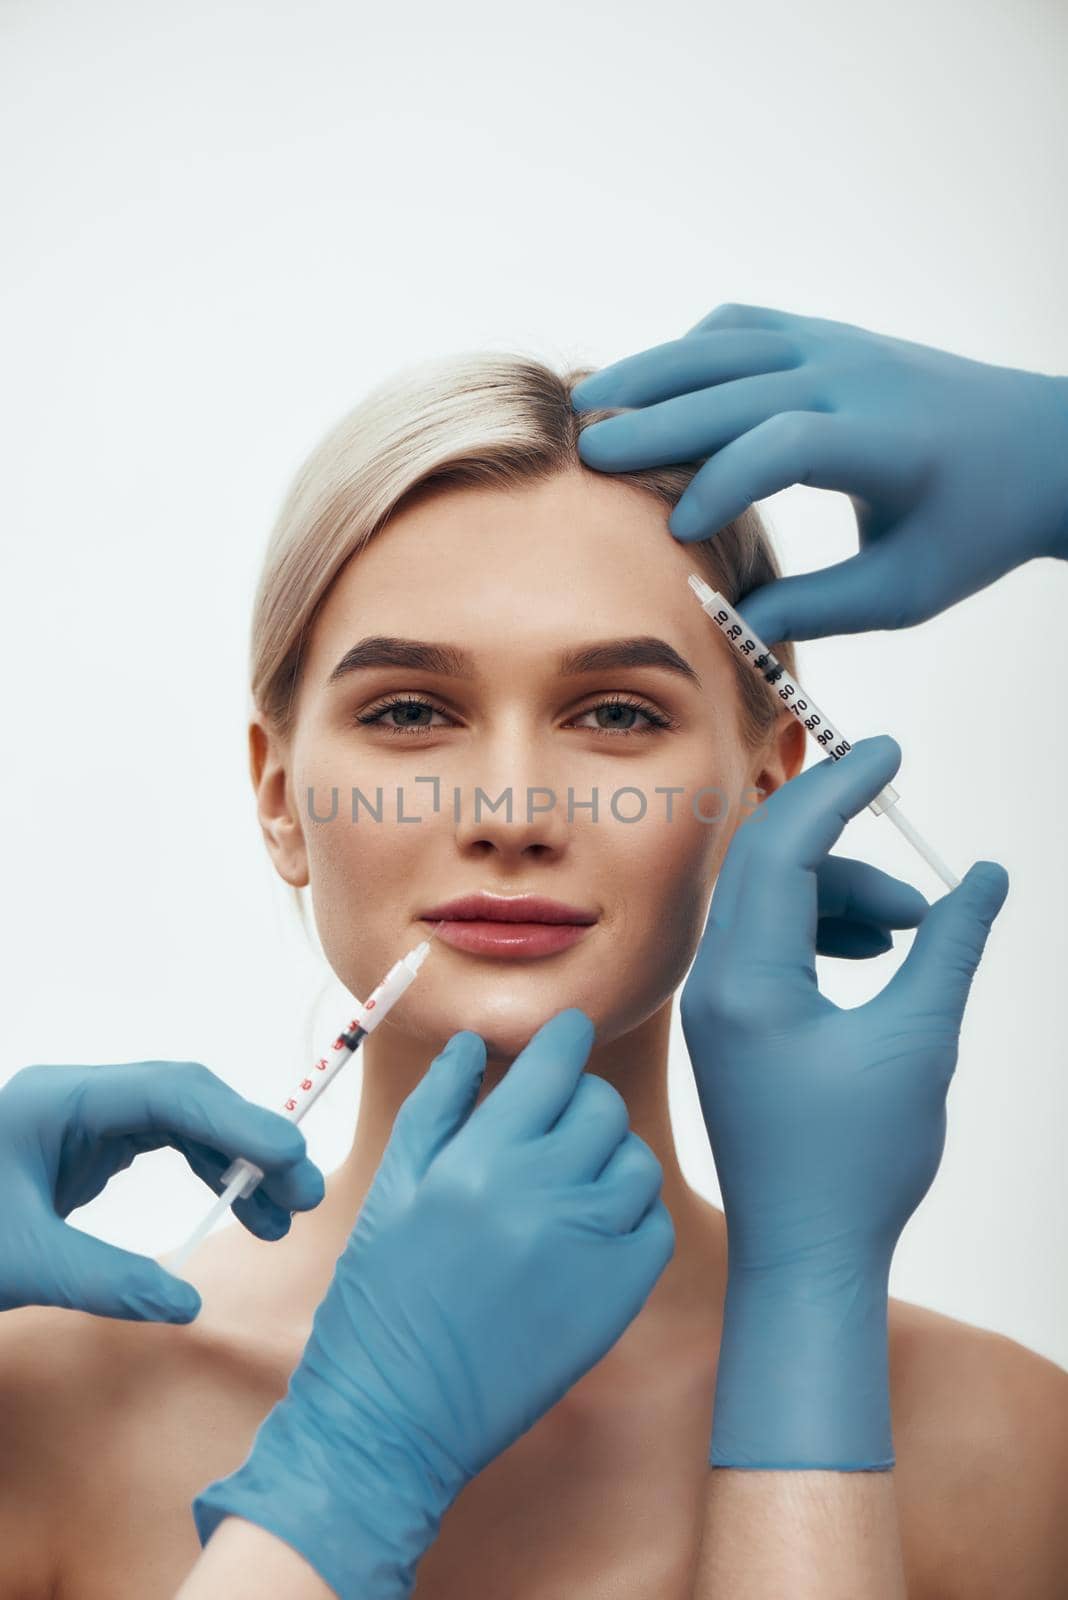 Creating beauty. Portrait of young pretty woman looking at camera and smiling while doctors in blue medical gloves making injections in her face by friendsstock